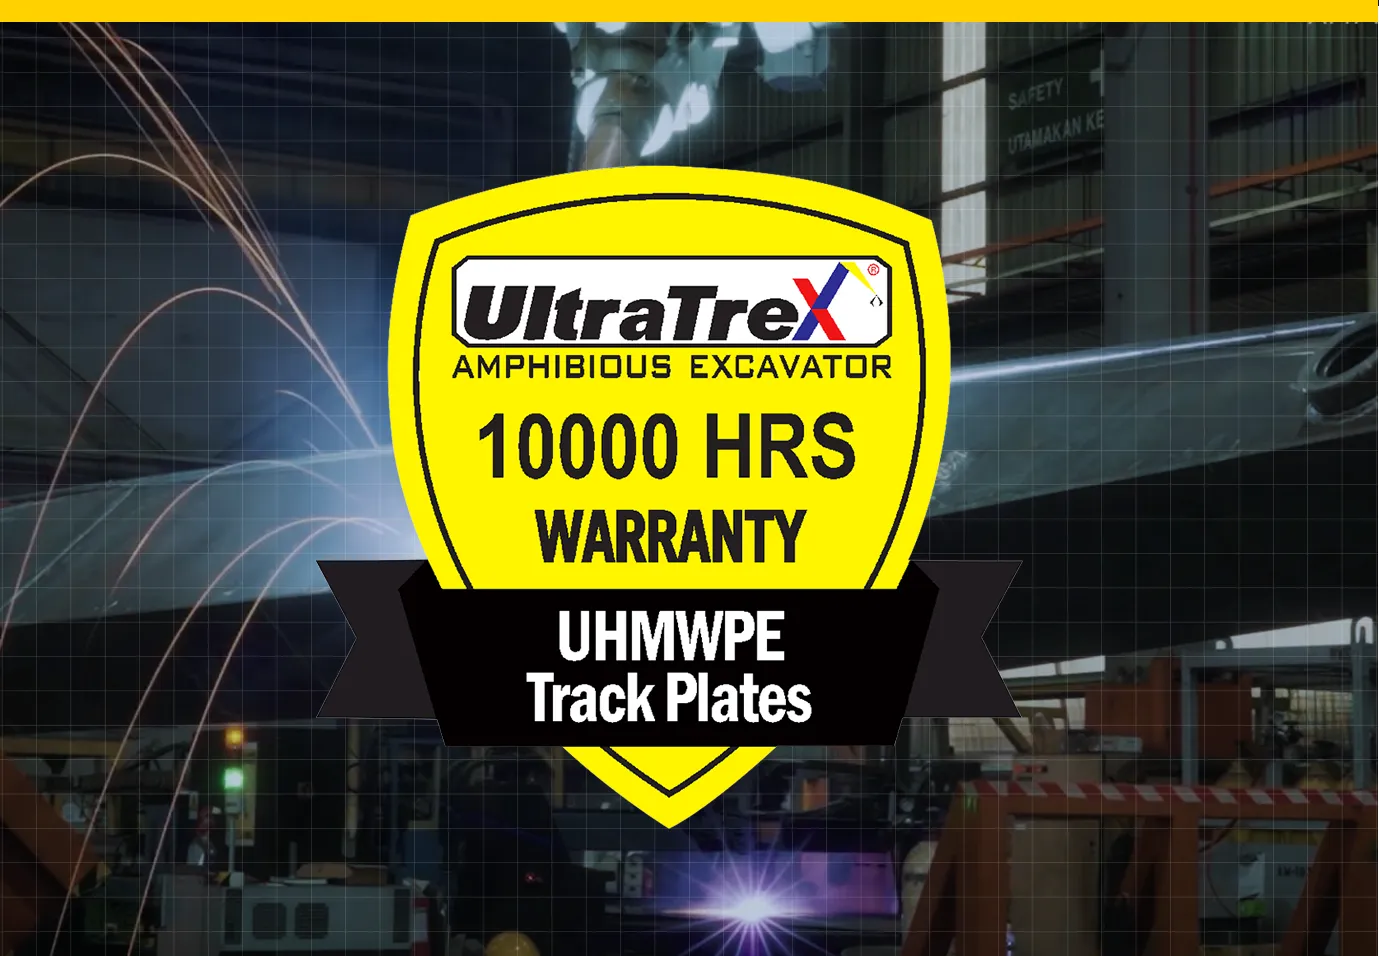 Ultratrex, the only company that assured customers with 10,000 hours of warranty for UHMWPE track plates against cracks